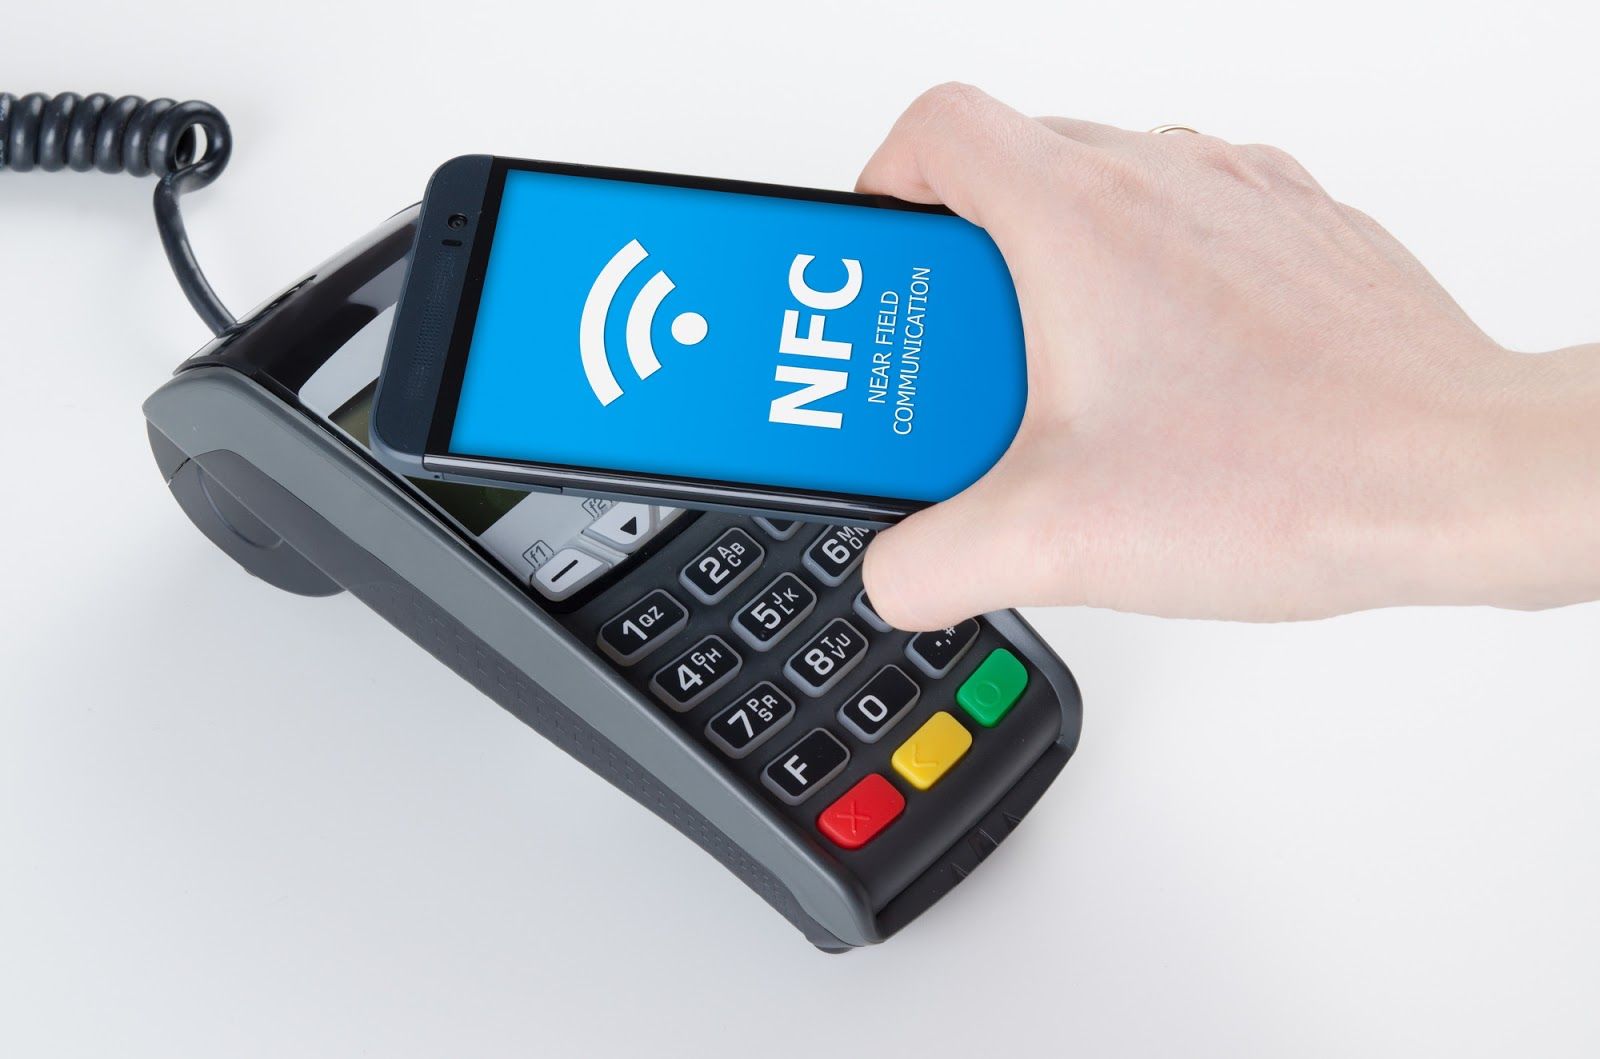 A smartphone with NFC features is shown being used to make a payment at a point-of-sale terminal.